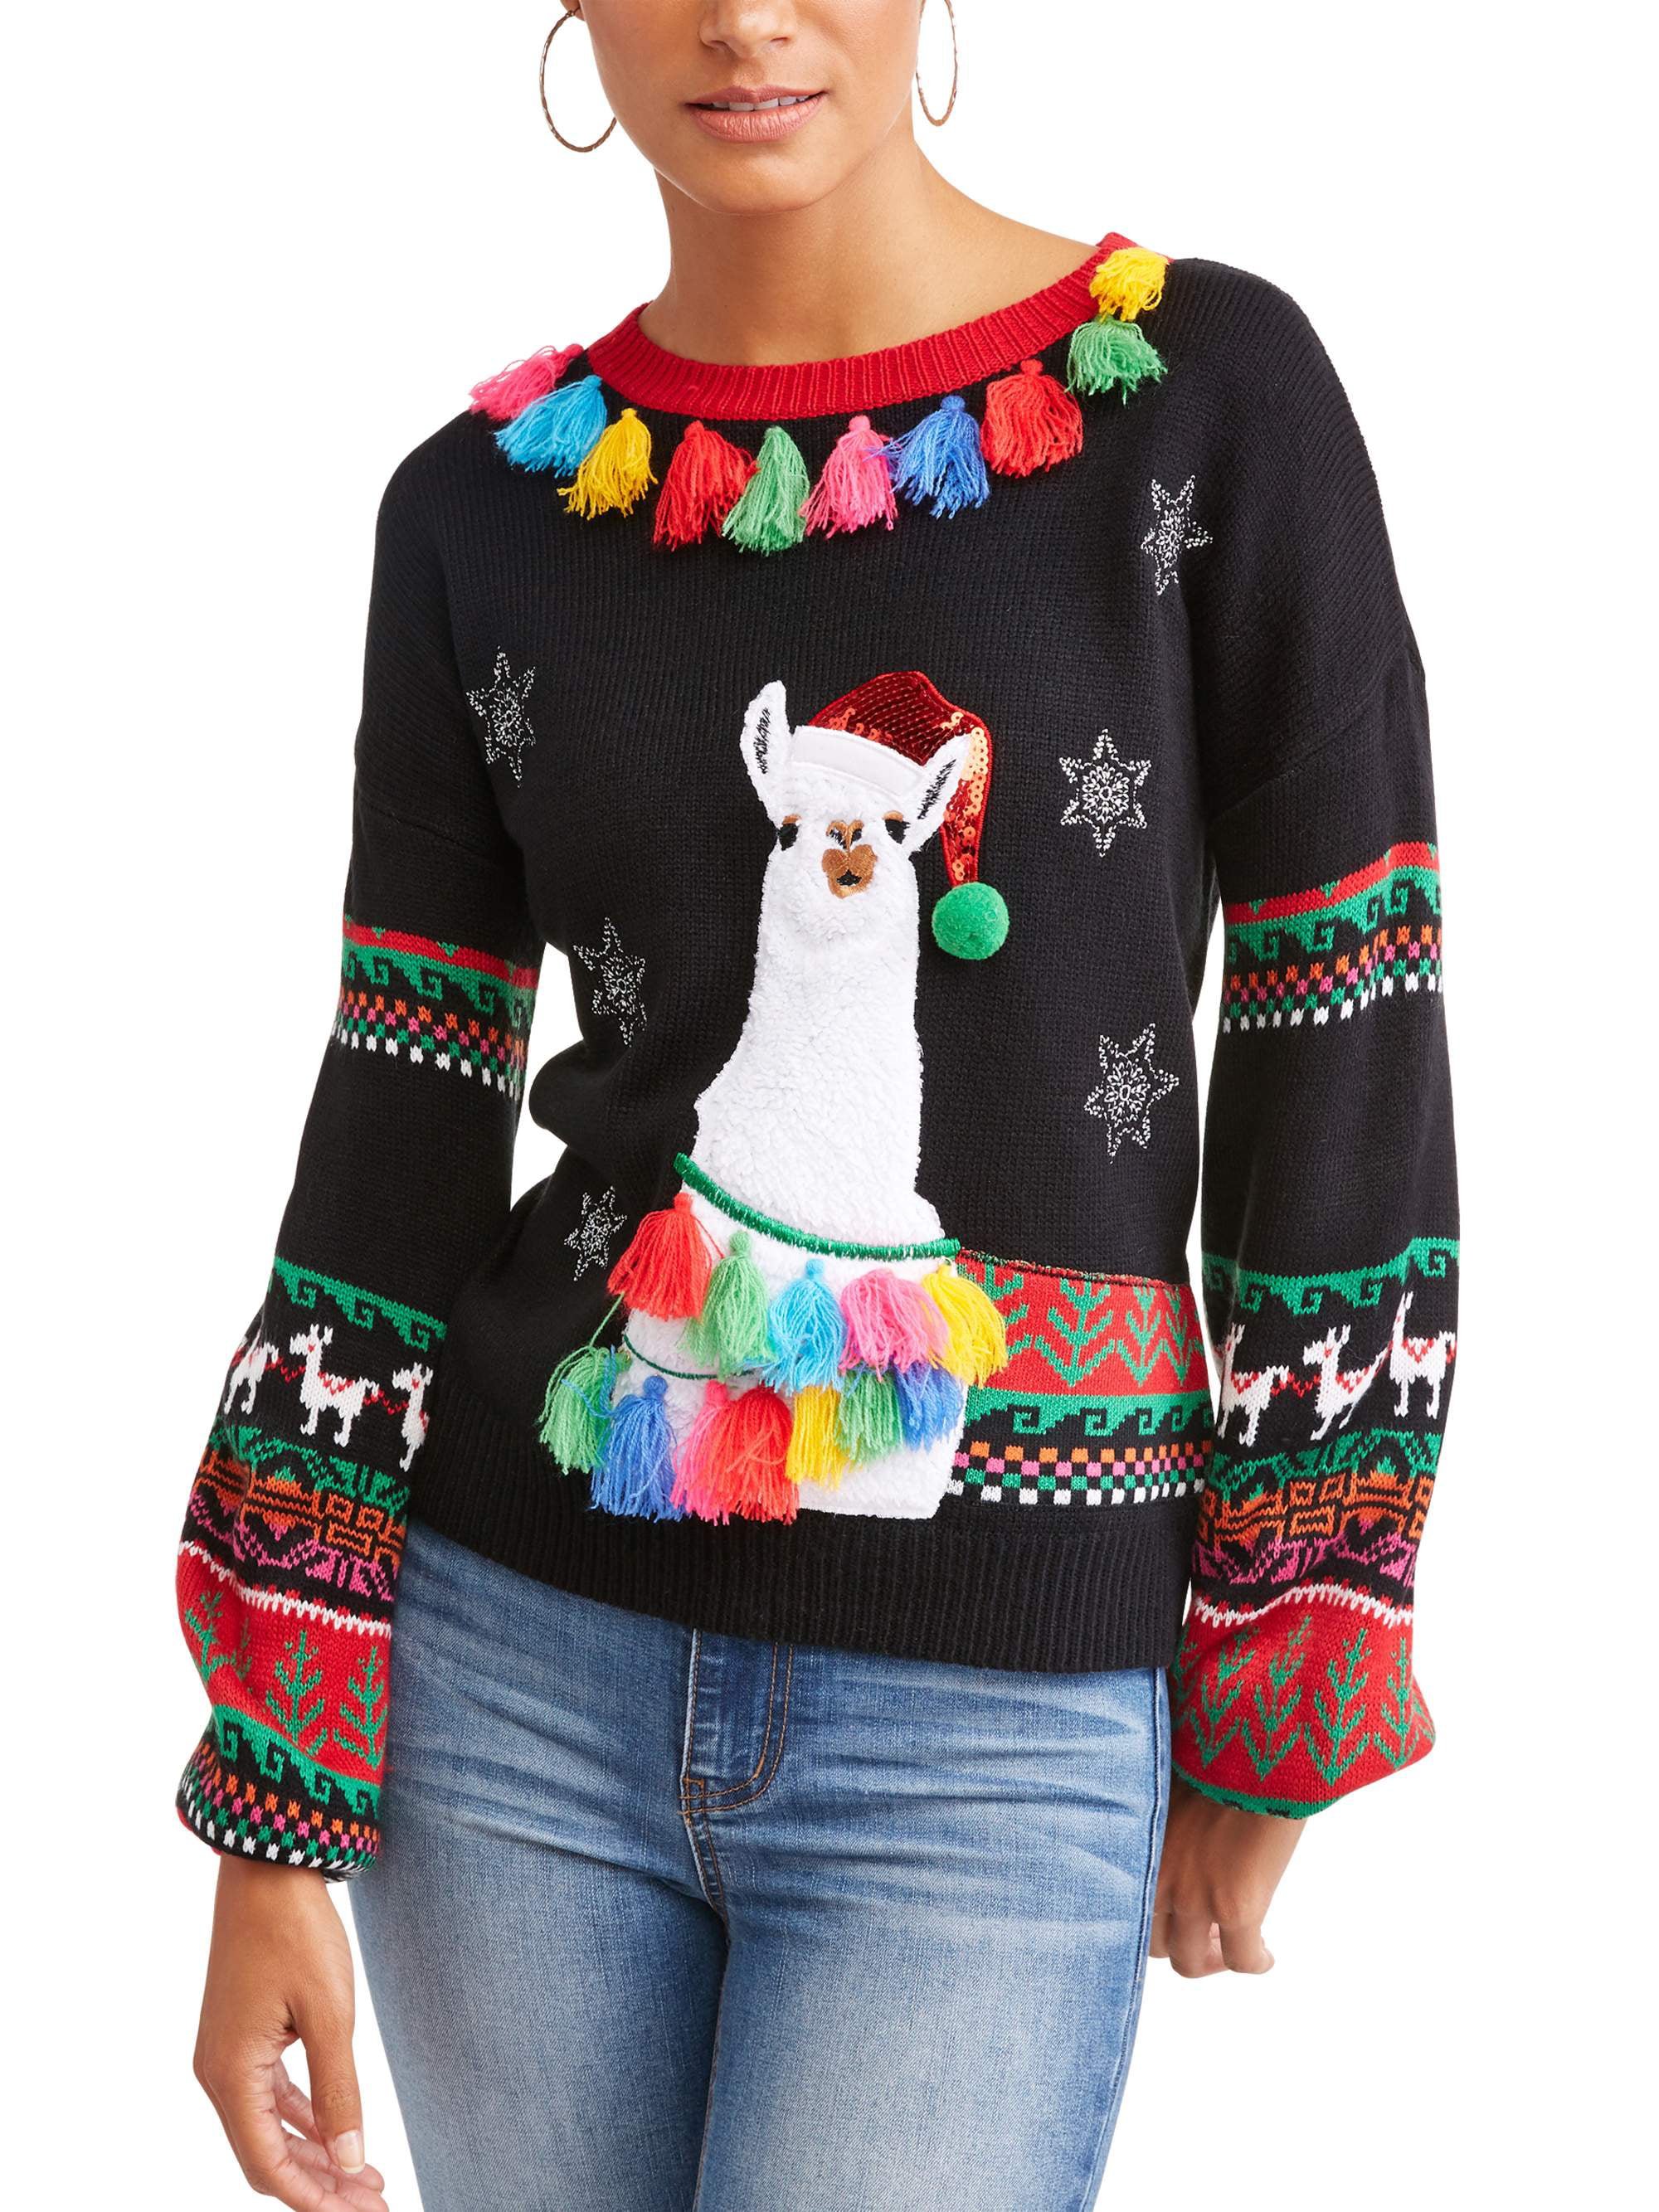 Unisex Ugly Womens Christmas Sweater Cute Animal Llama Reindeer Knitted Funny Pullover Santa 